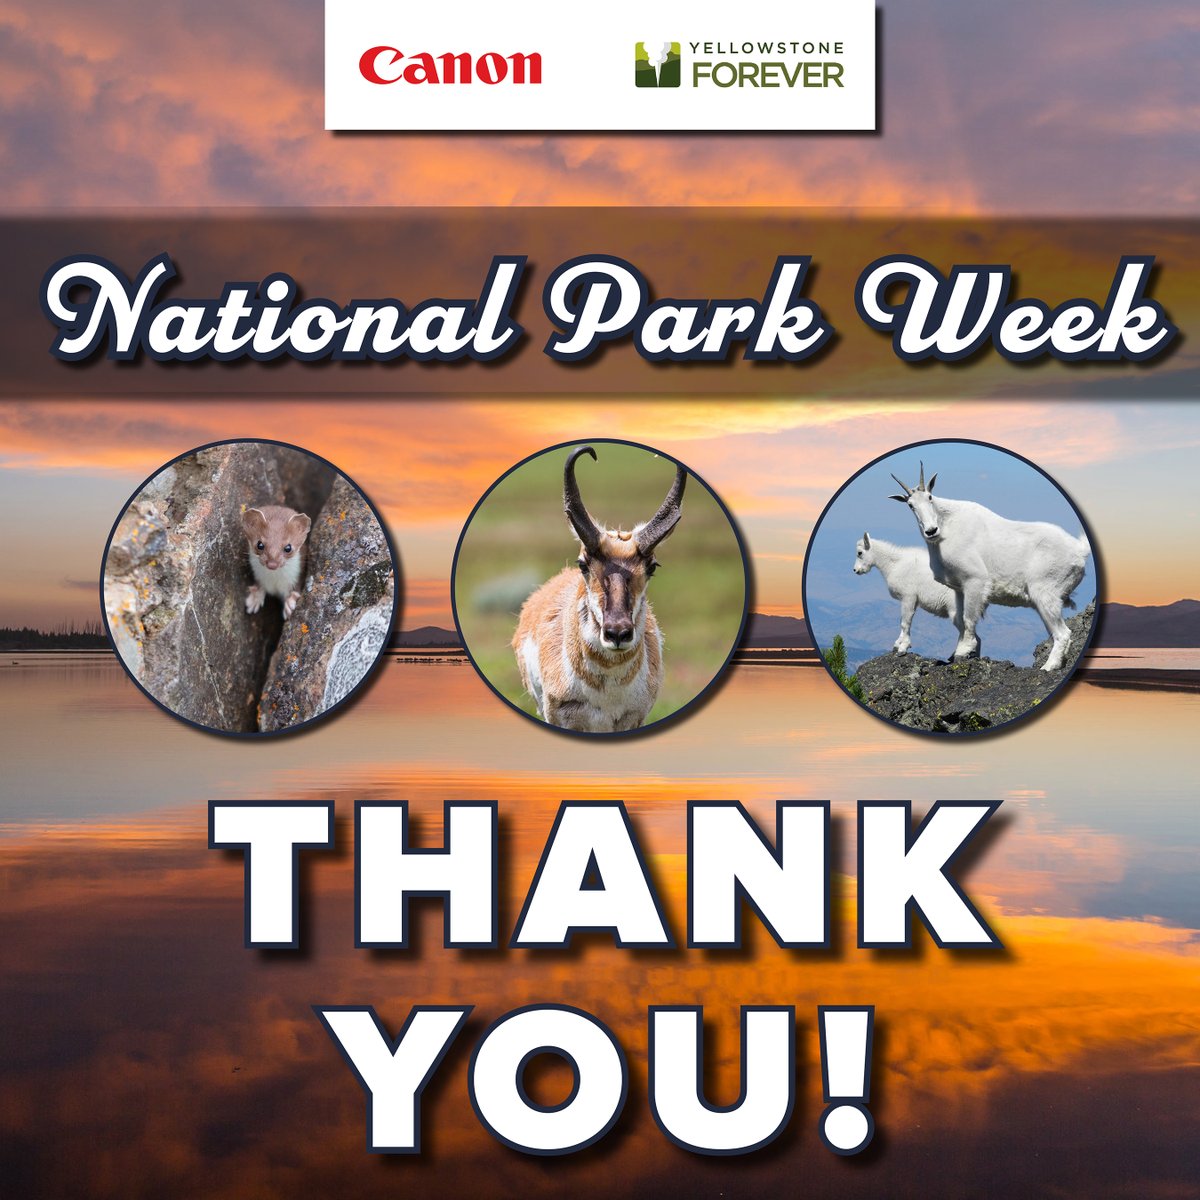 Thank you for keeping up with our #NationalParkWeek content! We hope you enjoyed learning more about our park-nership with @ynpforever 🏞️

Do you have a favorite national park? Let us know in the comments!